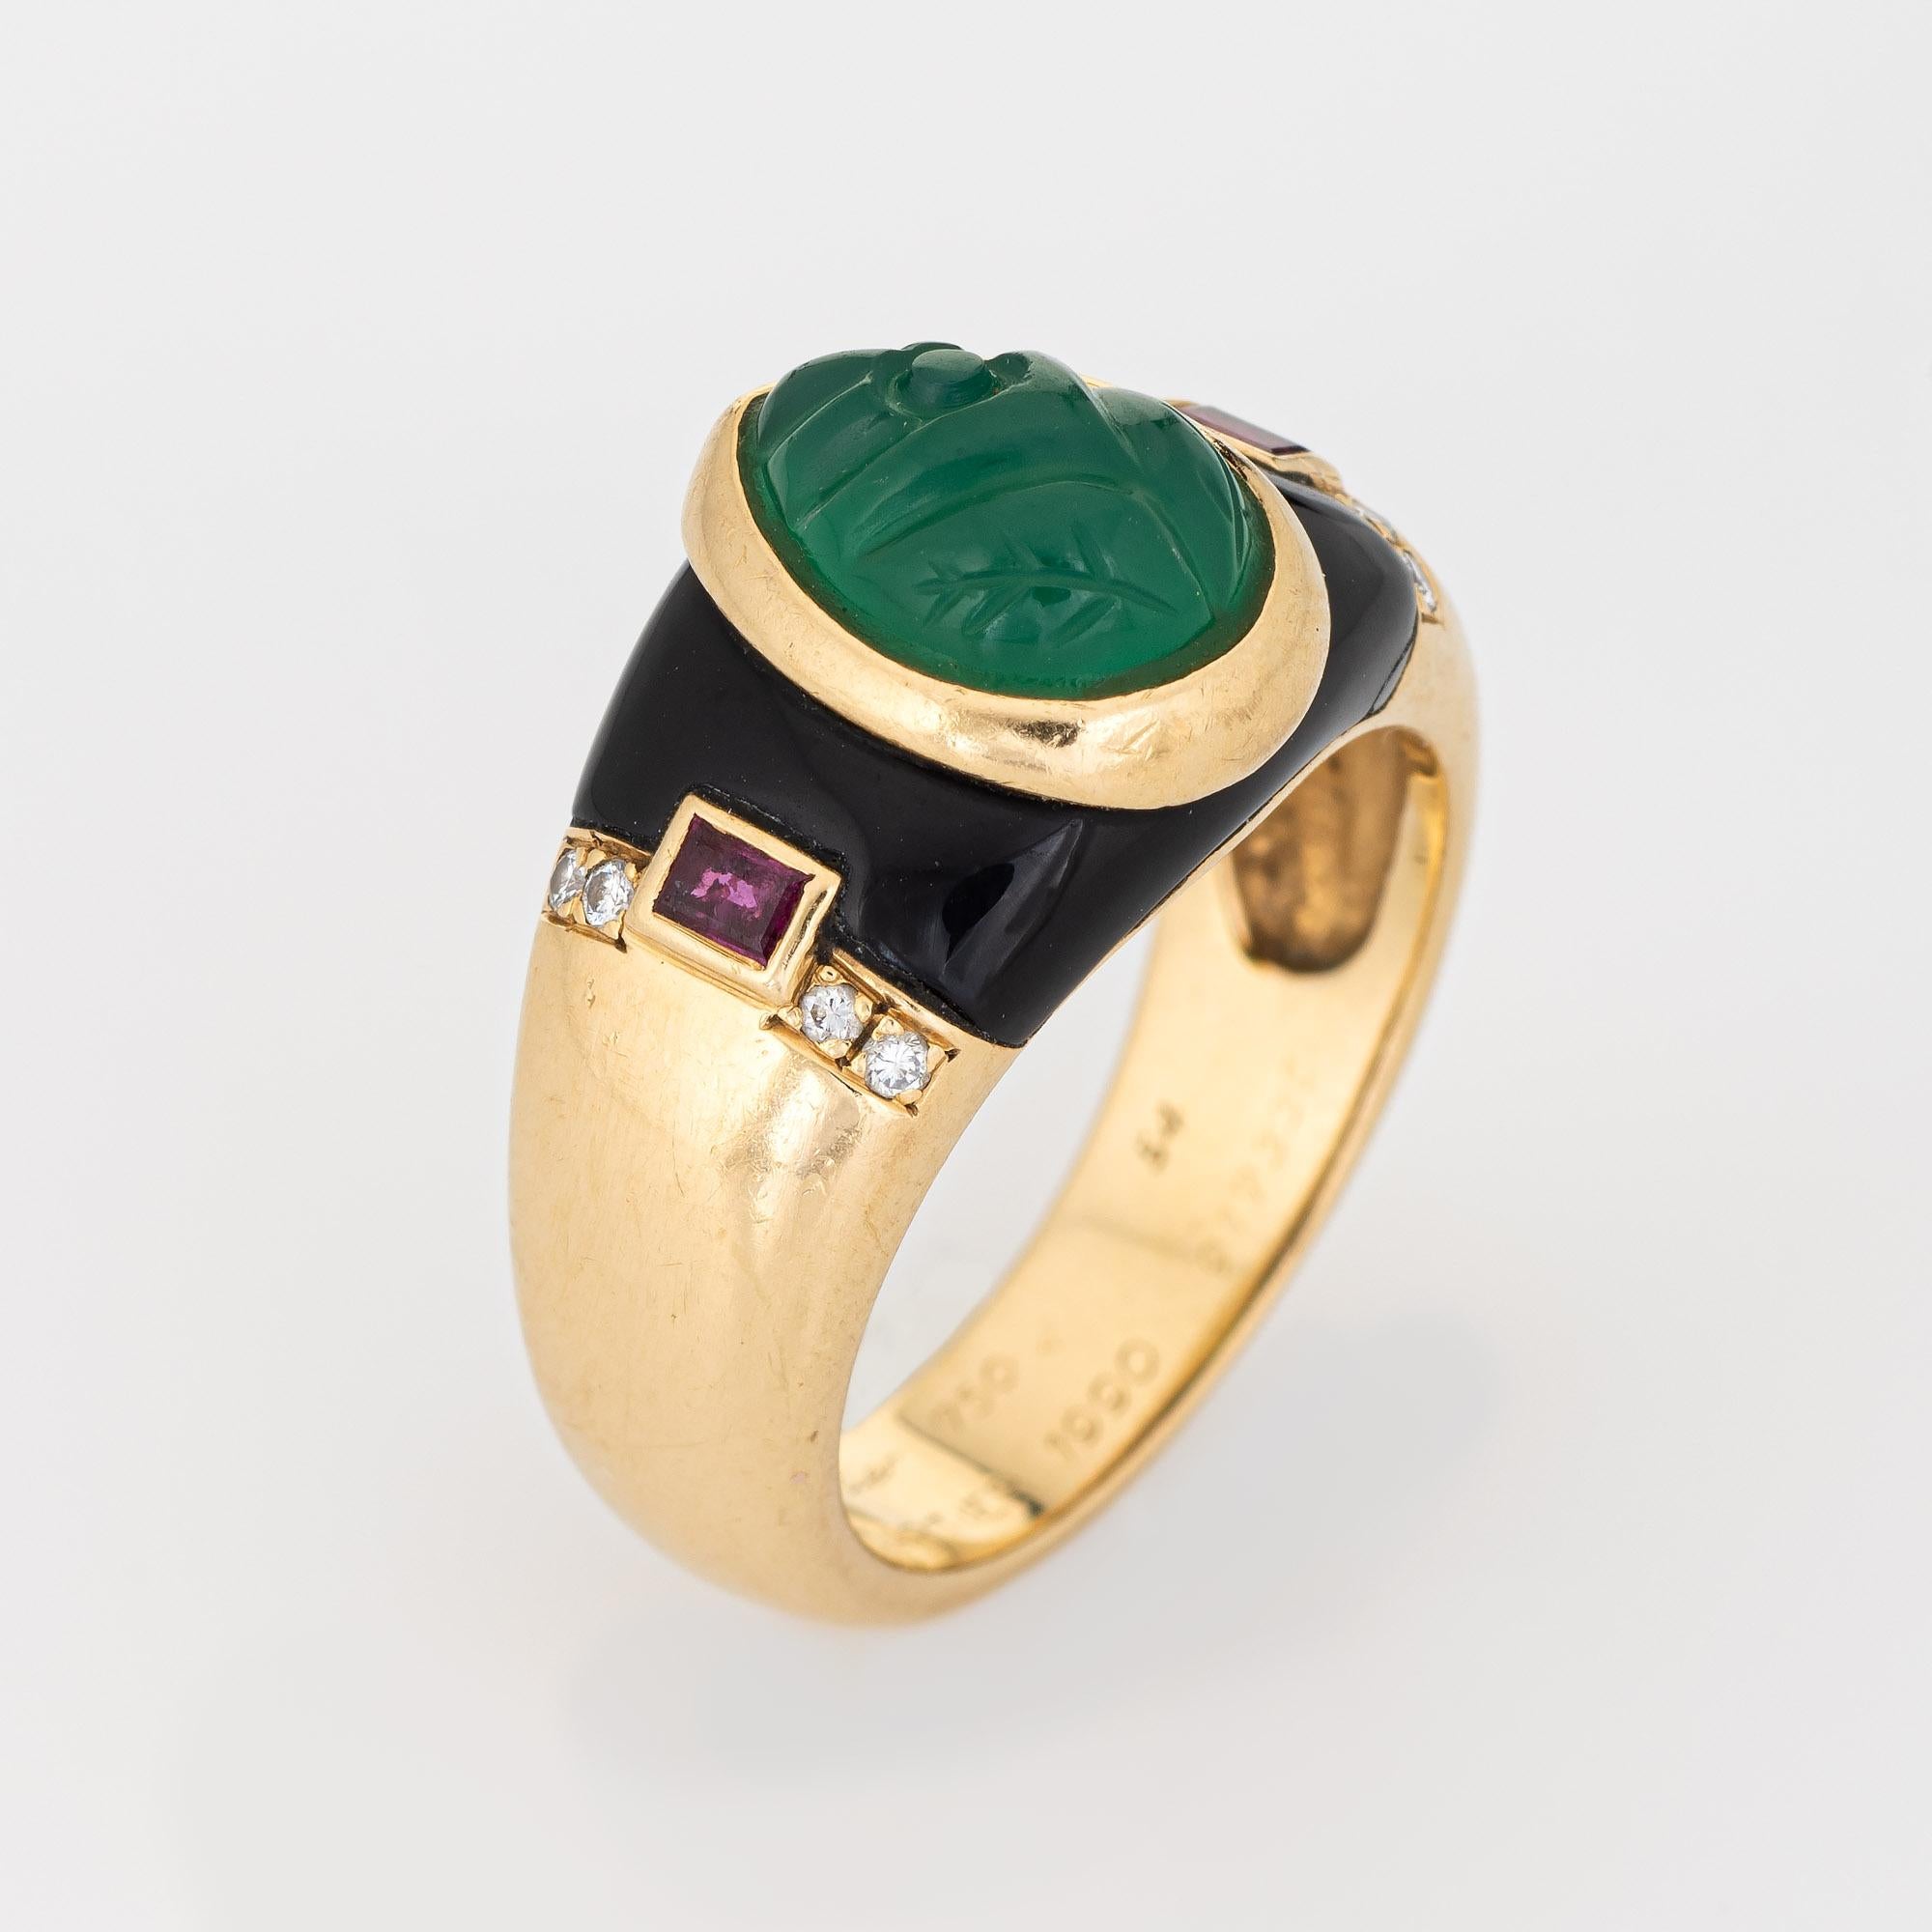 Stylish vintage Cariter Mughal ring crafted in 18 karat yellow gold (circa 1990). 

Carved chrysoprase measures 10mm x 7mm, accented with two estimated 0.10 carat rubies and eight estimated 0.01 carat diamonds (estimated at F-G color and VVS2